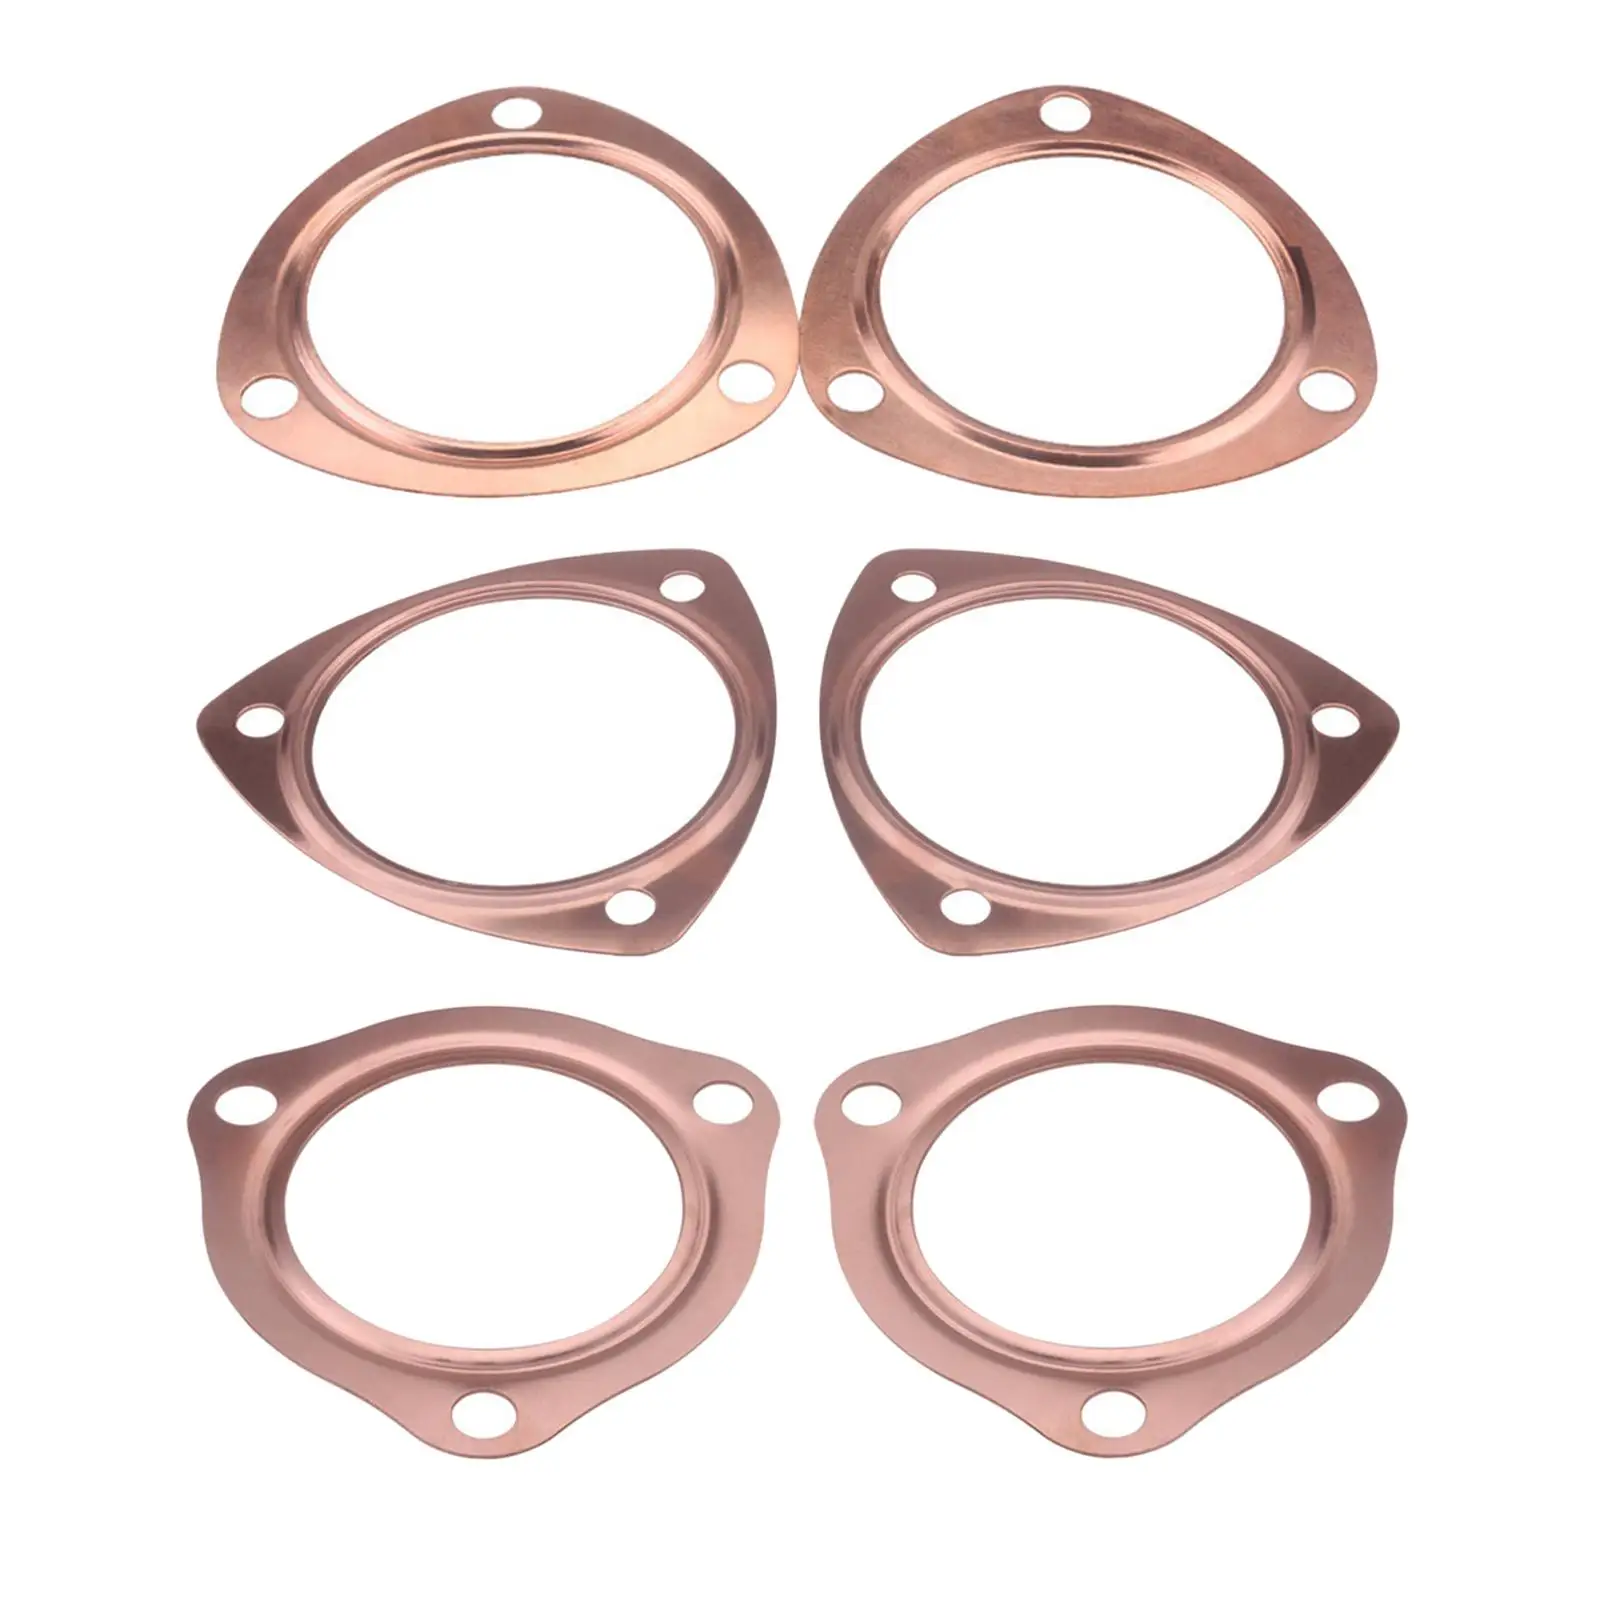 Copper Collector Gasket Anti Scratch Wear Resisting Anti Strike for Sbc Bbc 302 350 454 Car Direct Replaces Spare Parts